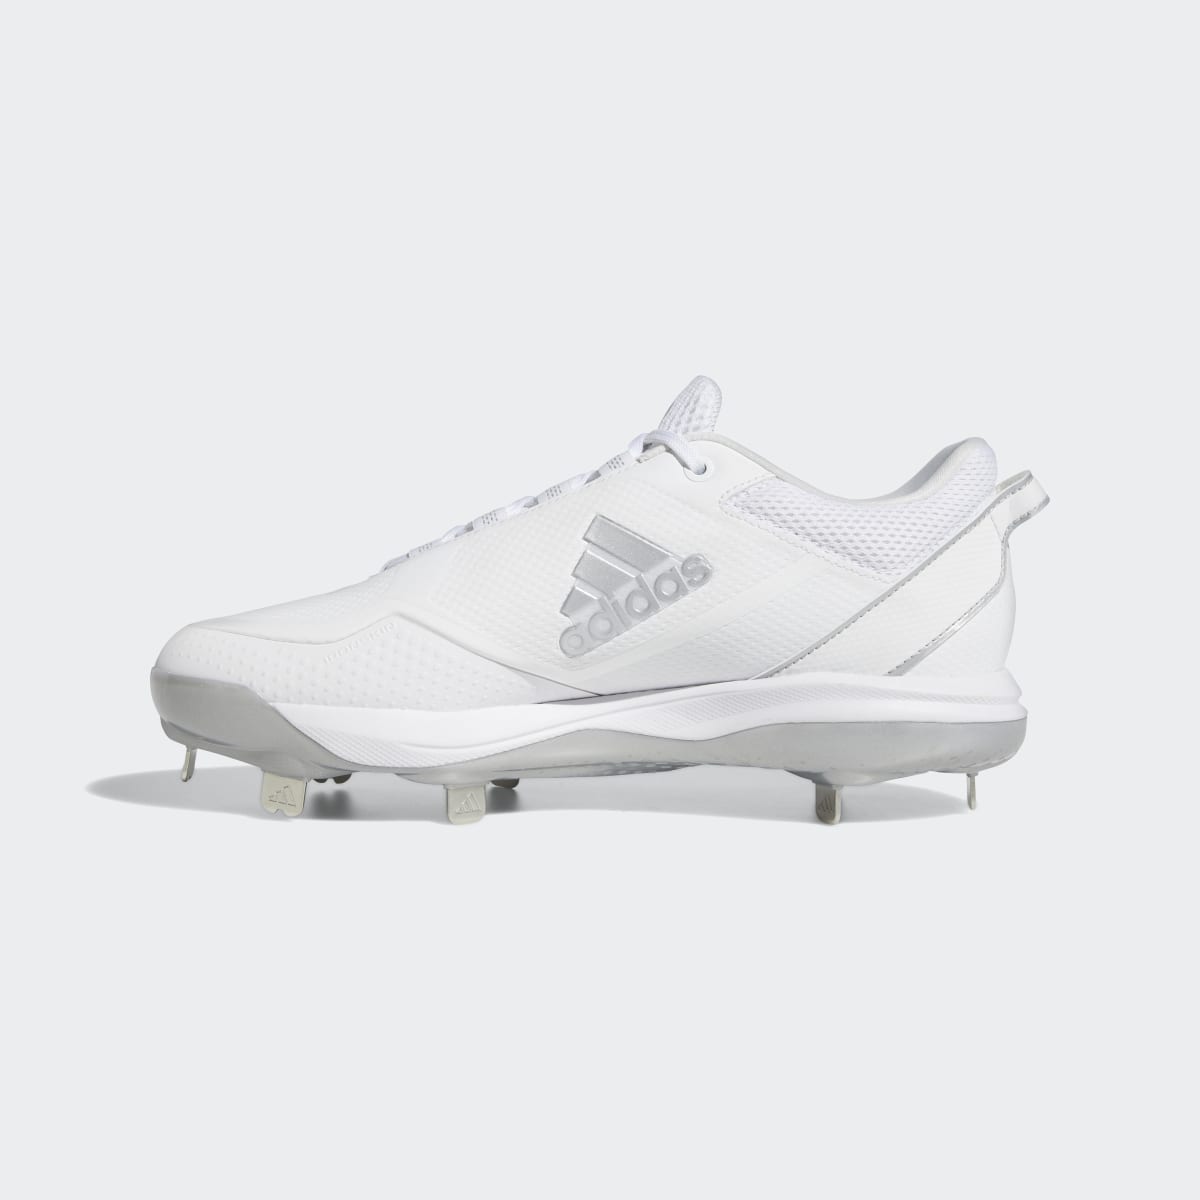 Adidas Icon 7 Cleats. 7